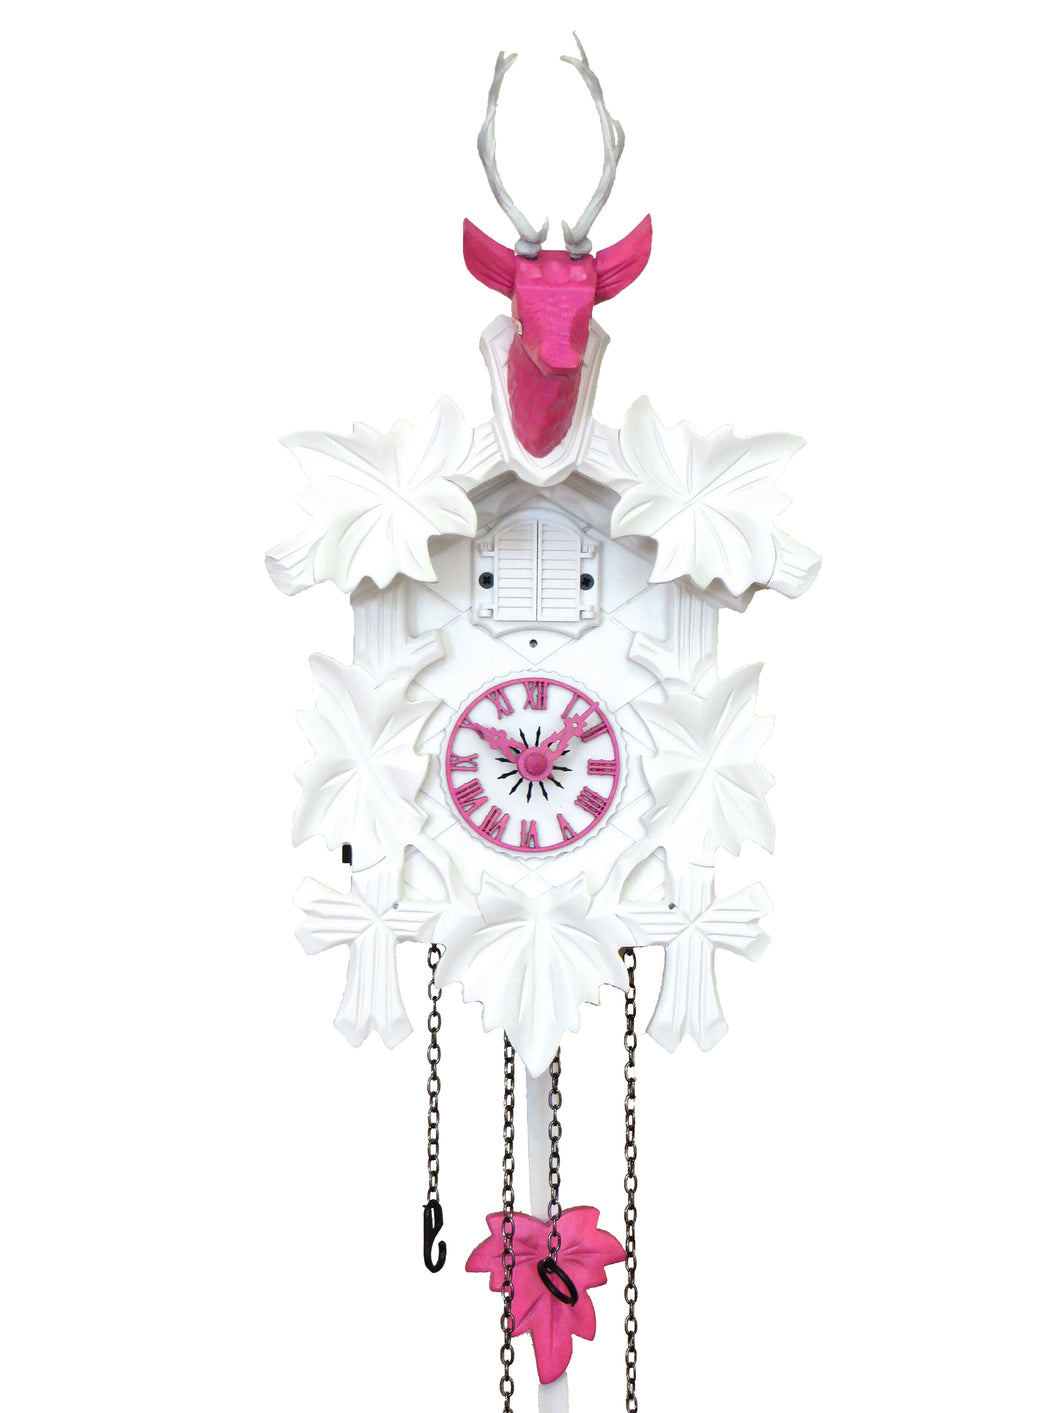 NEW - Modern Cuckoo in White with Hot Pink Accents